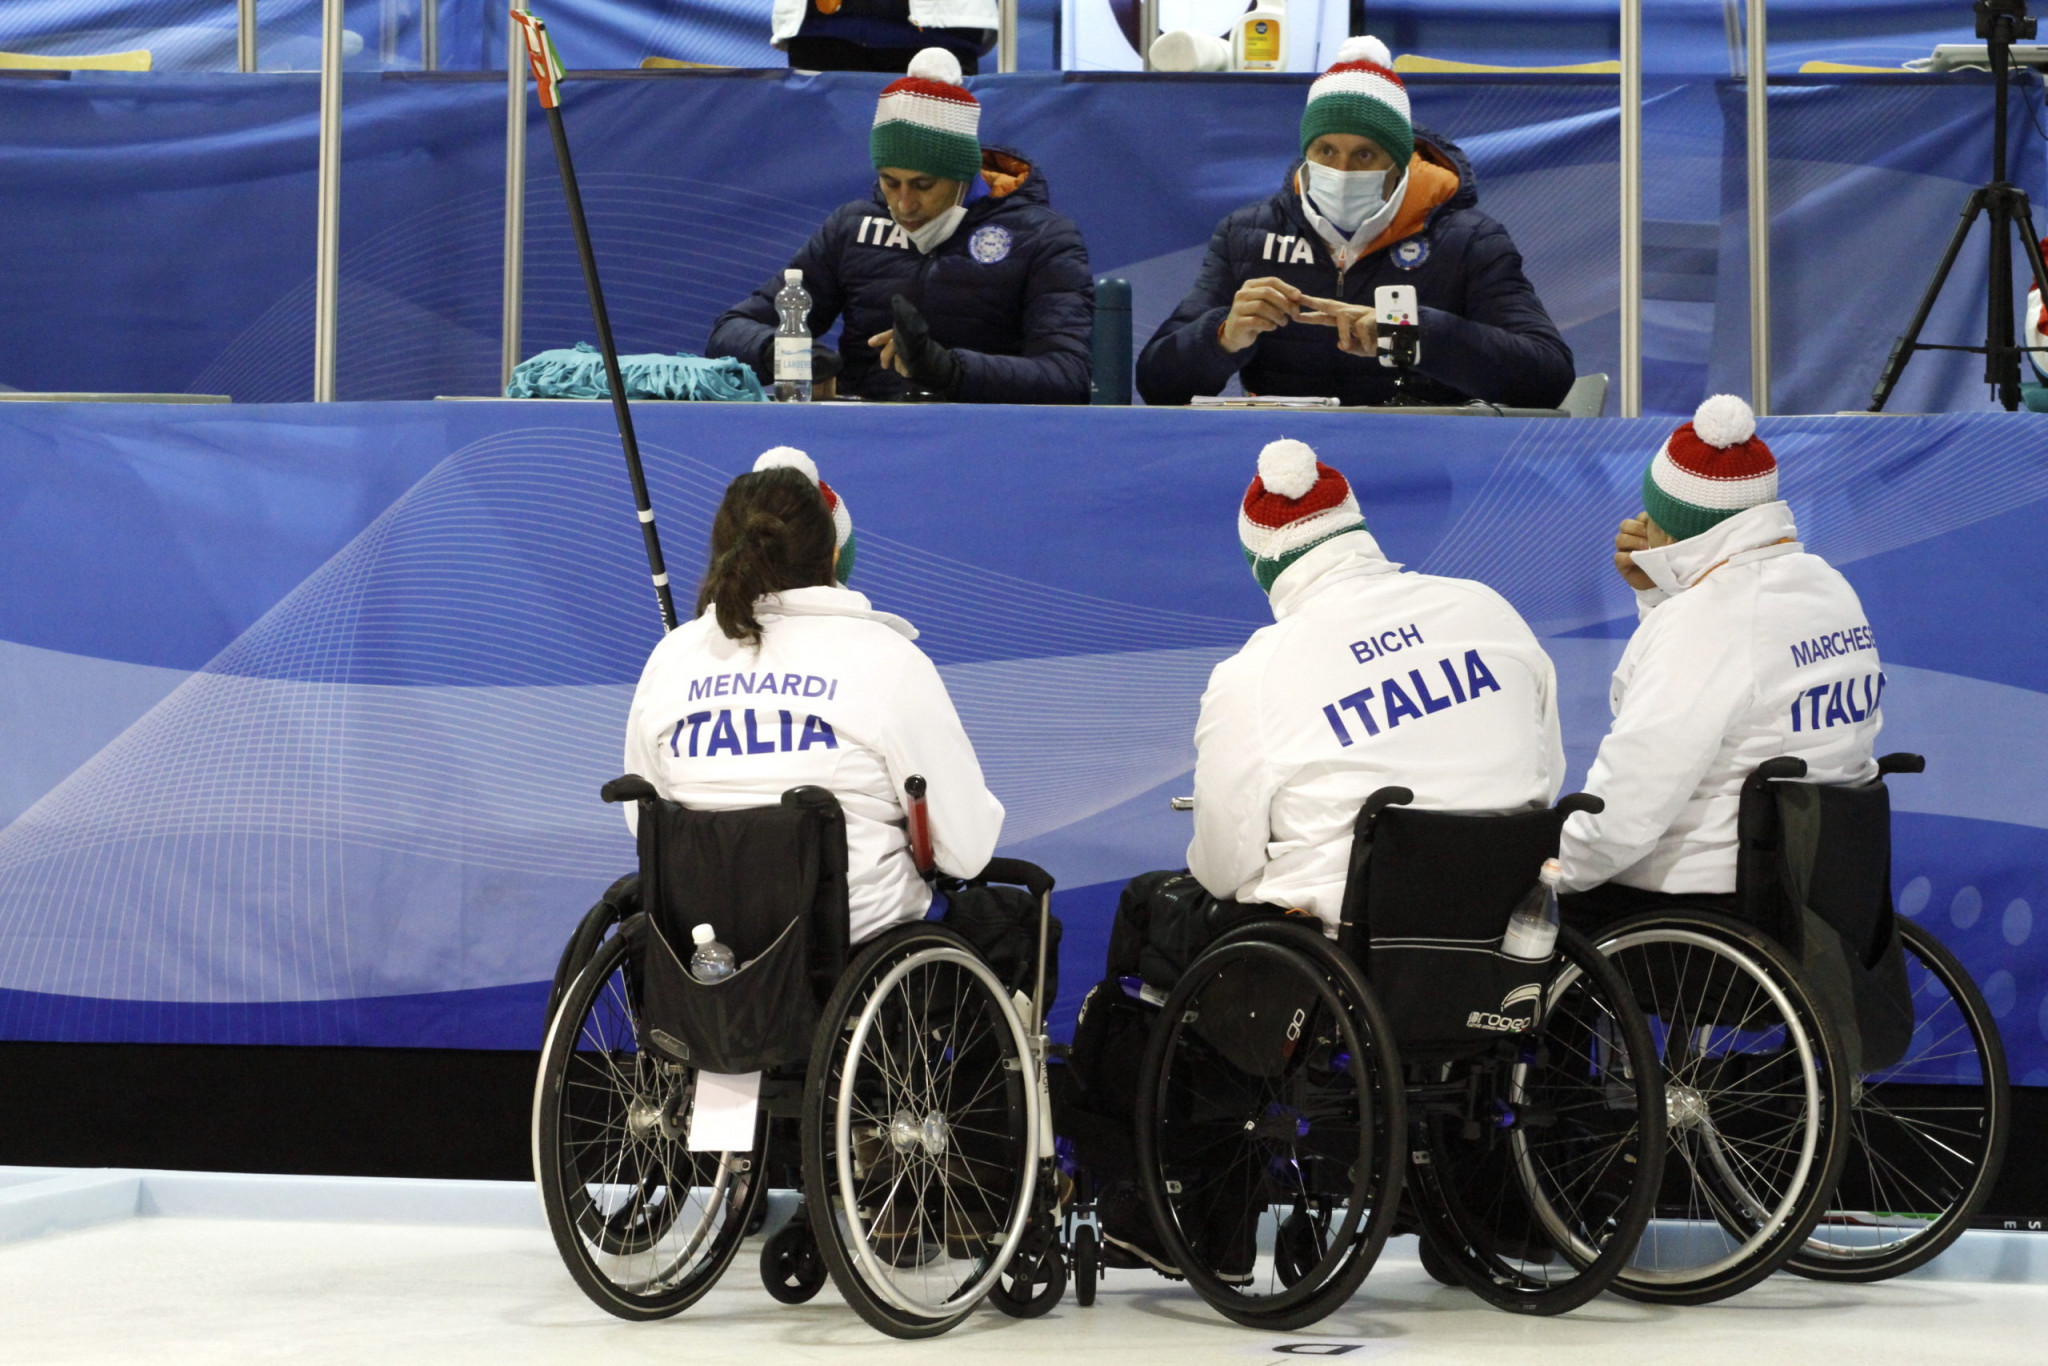 Italy wins bronze medal in wheelchair World Championship 2021 © WCF / Jiri Snitil